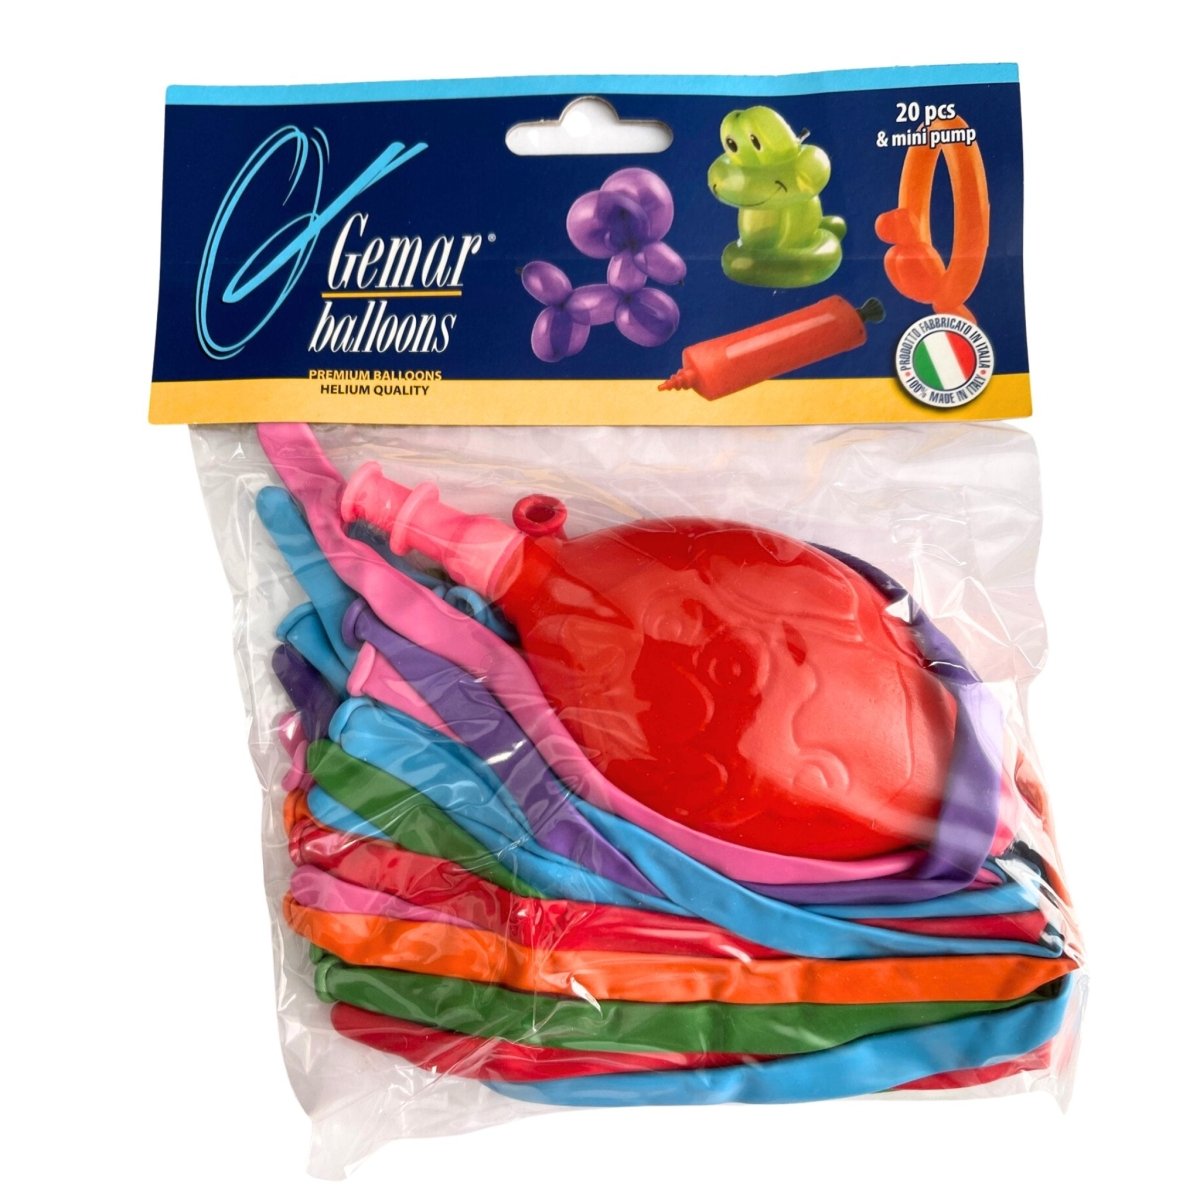 Modelling Balloons With Mini Pump (20 pack) - Kids Party Craft